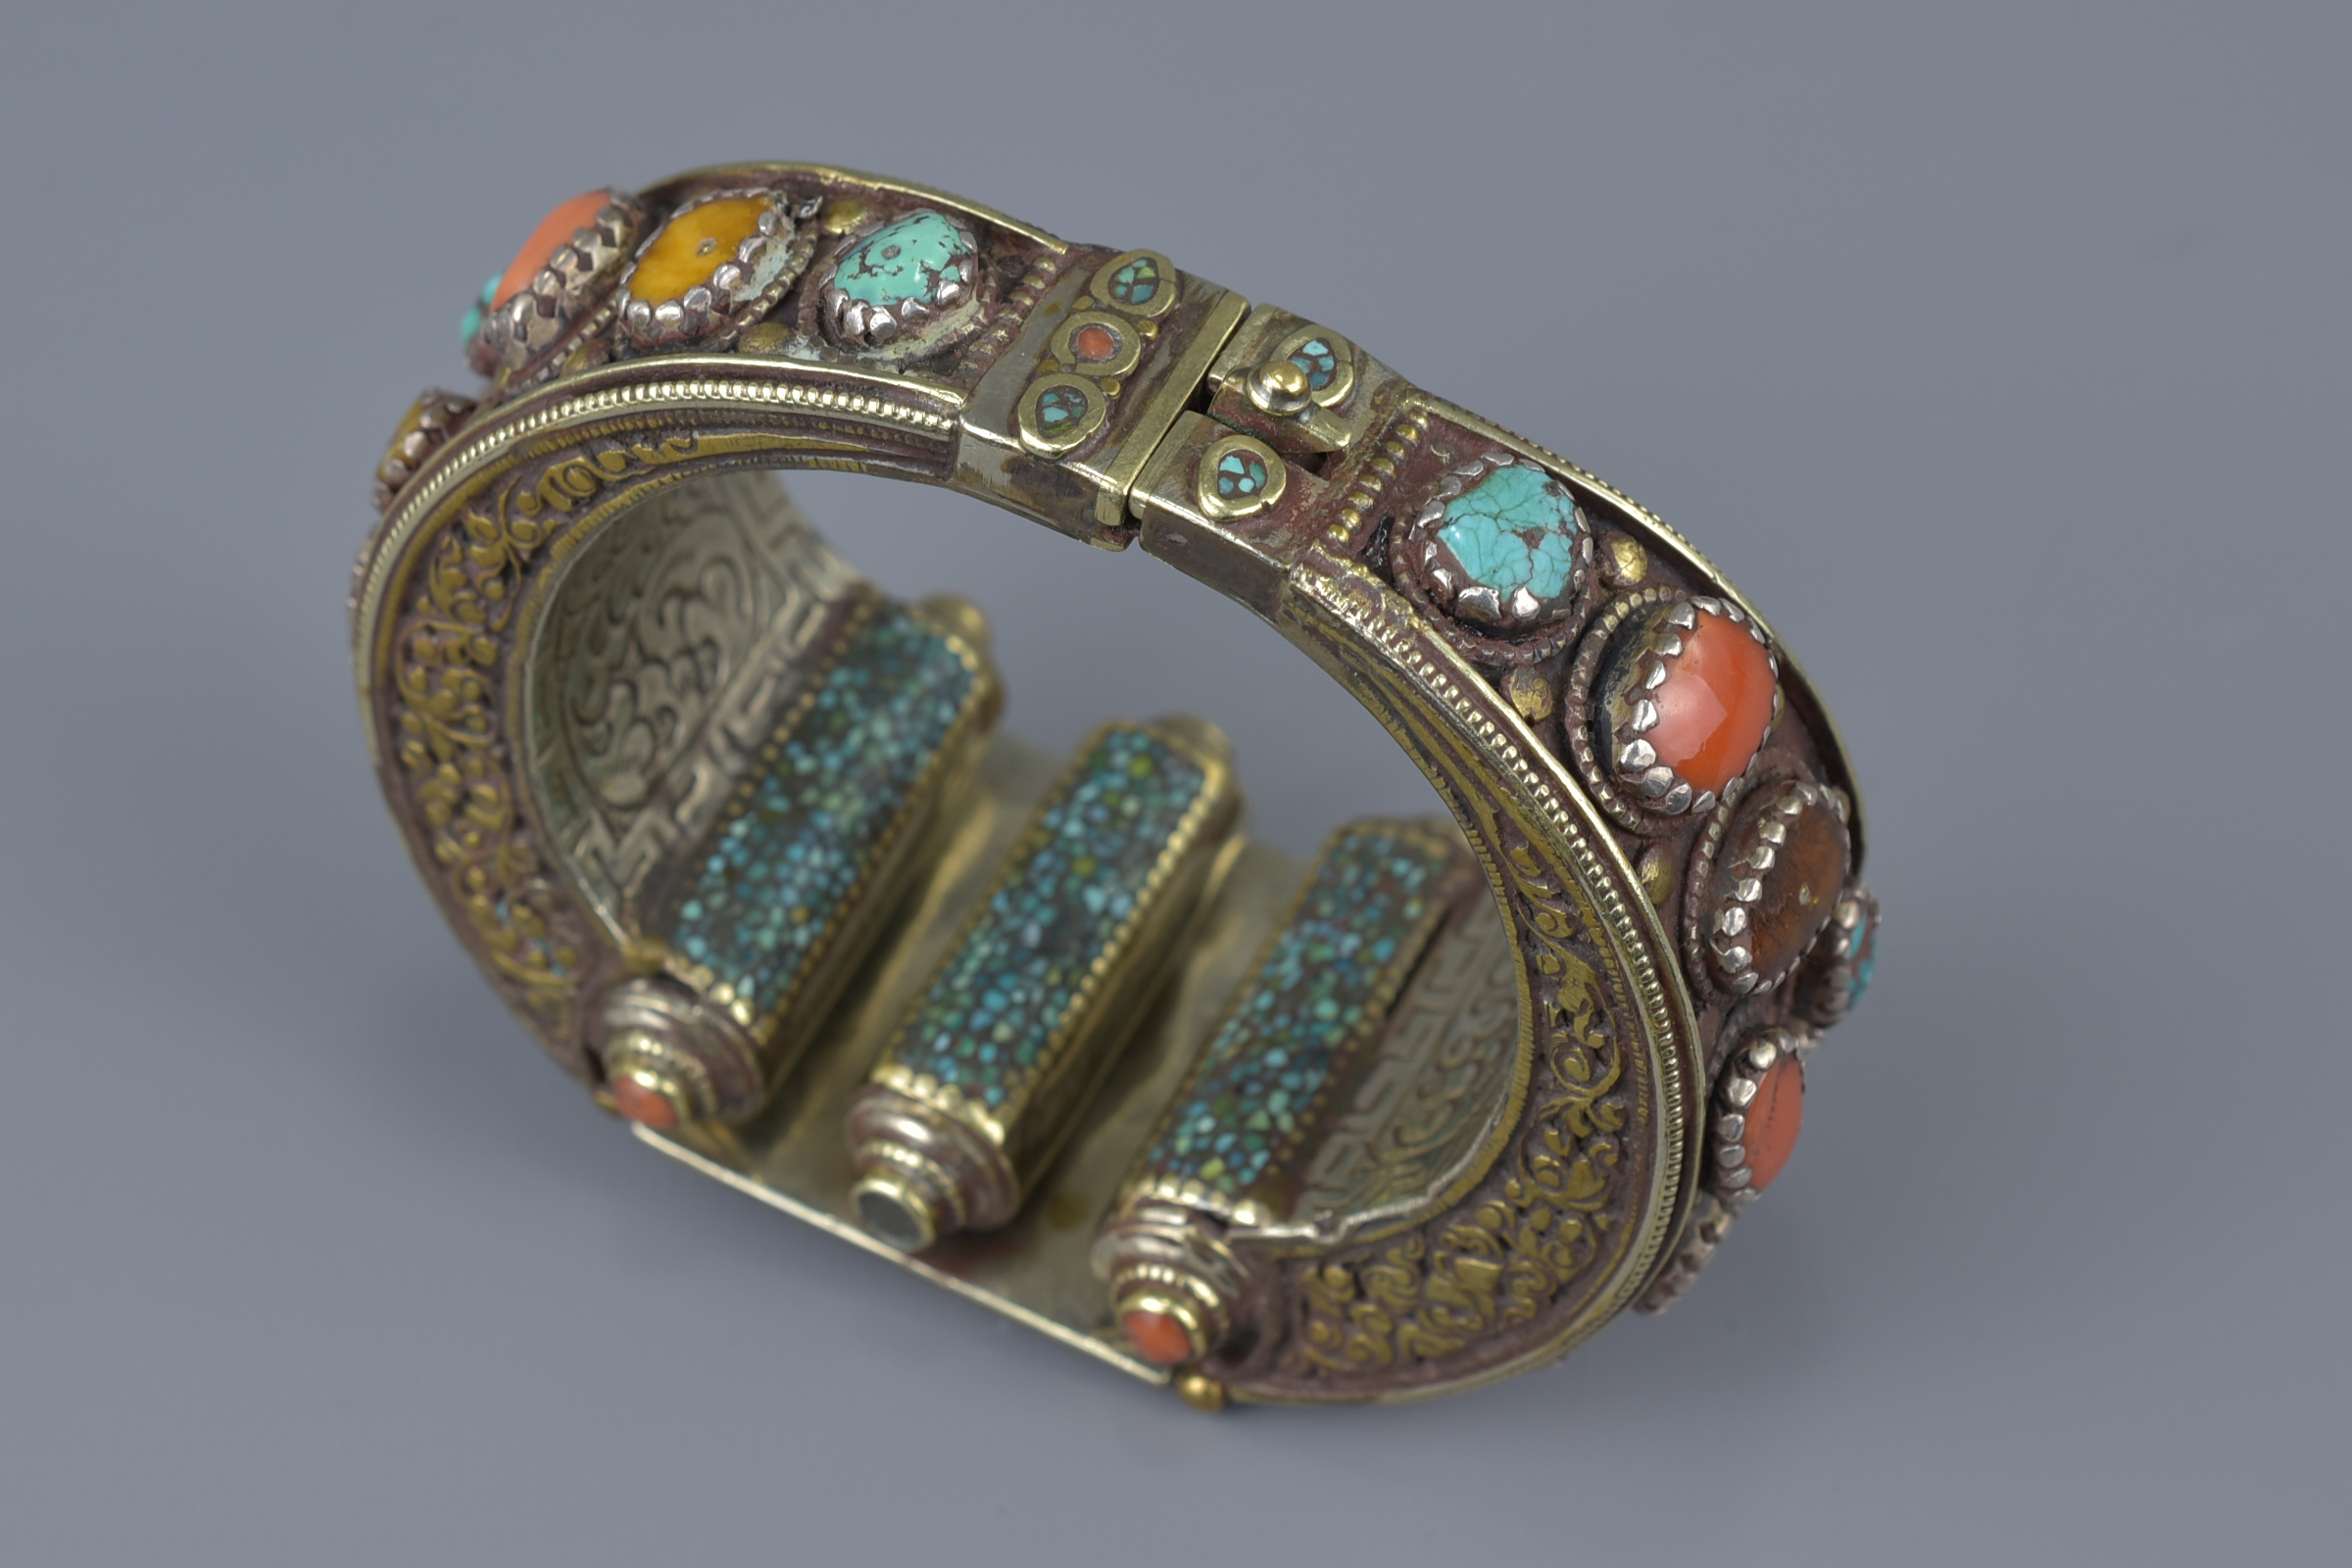 A Tibetan metal bracelet with various stone inserts. - Image 3 of 5